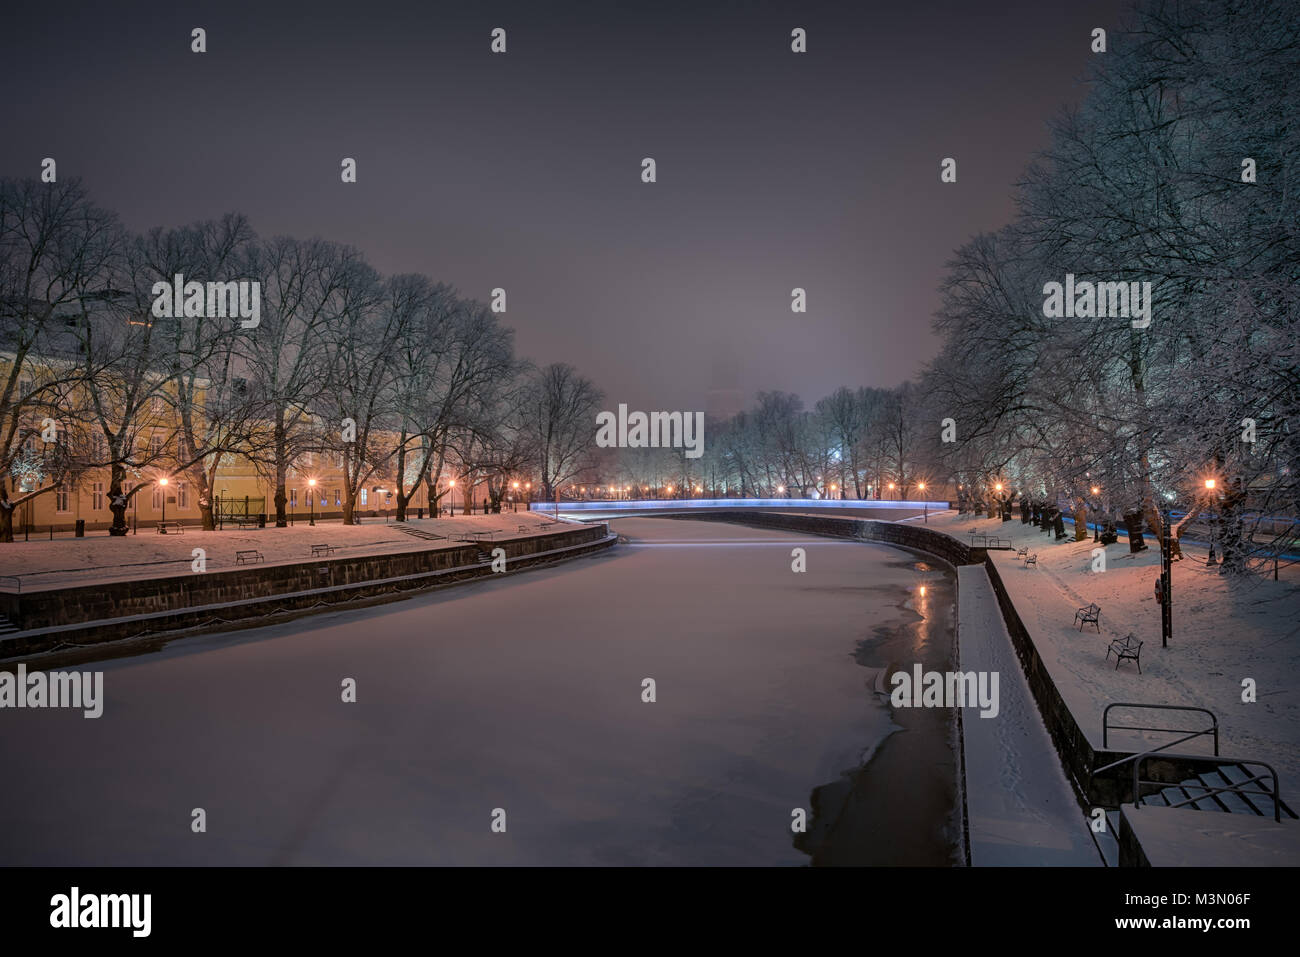 Beautiful view of Aura river with frost covered oak trees on the sides illuminated by streetlight and Turku Cathedral faintly seen in the background i Stock Photo